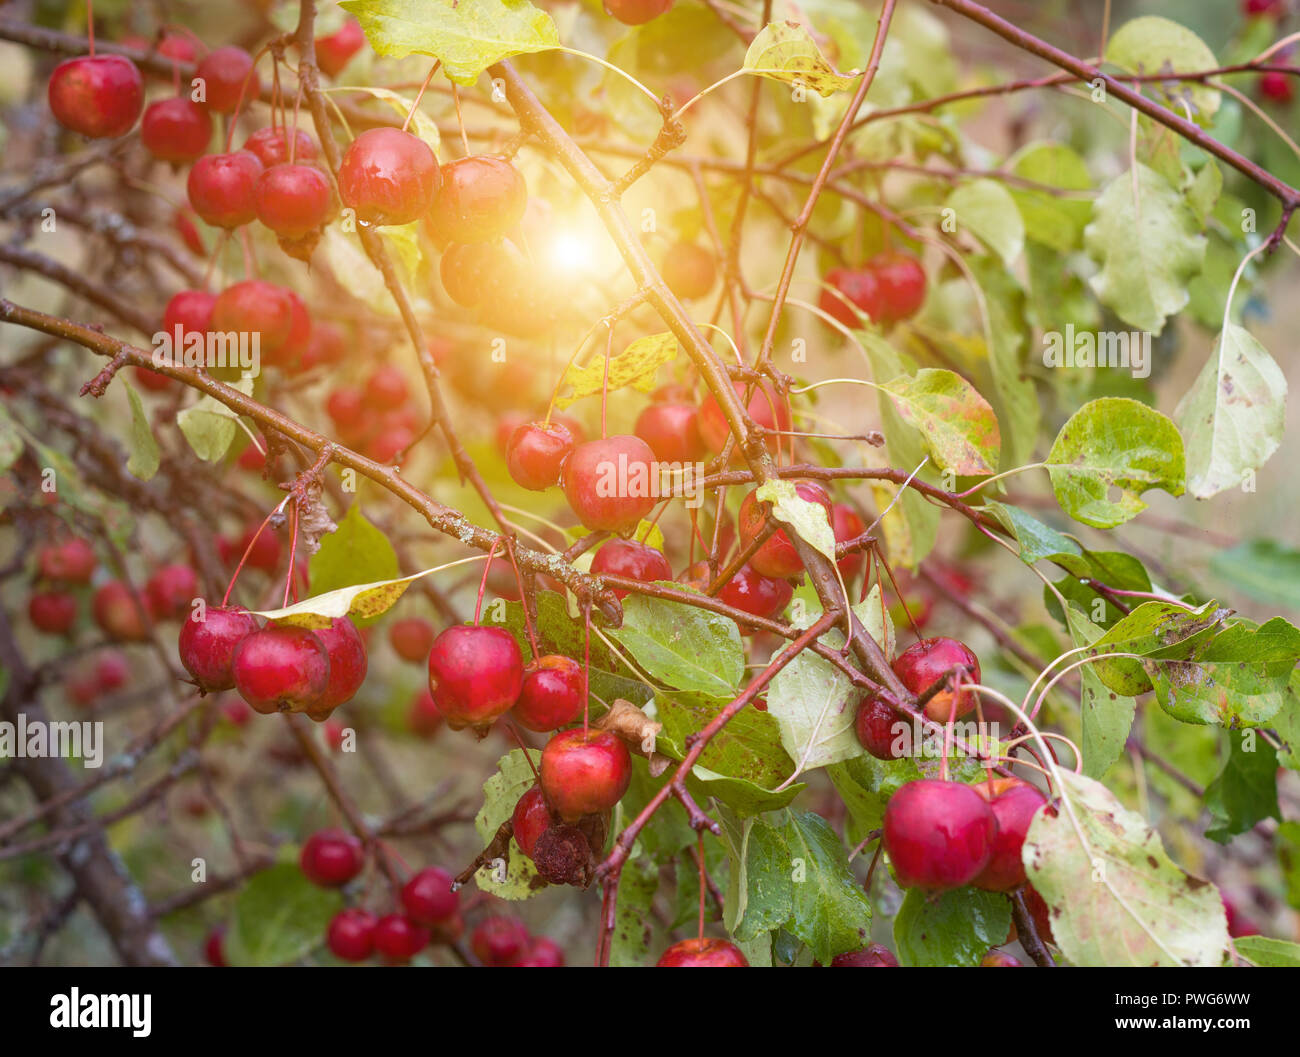 Chinese apple tree with small apples, heavenly apples, close-up, autumn, beautiful Stock Photo